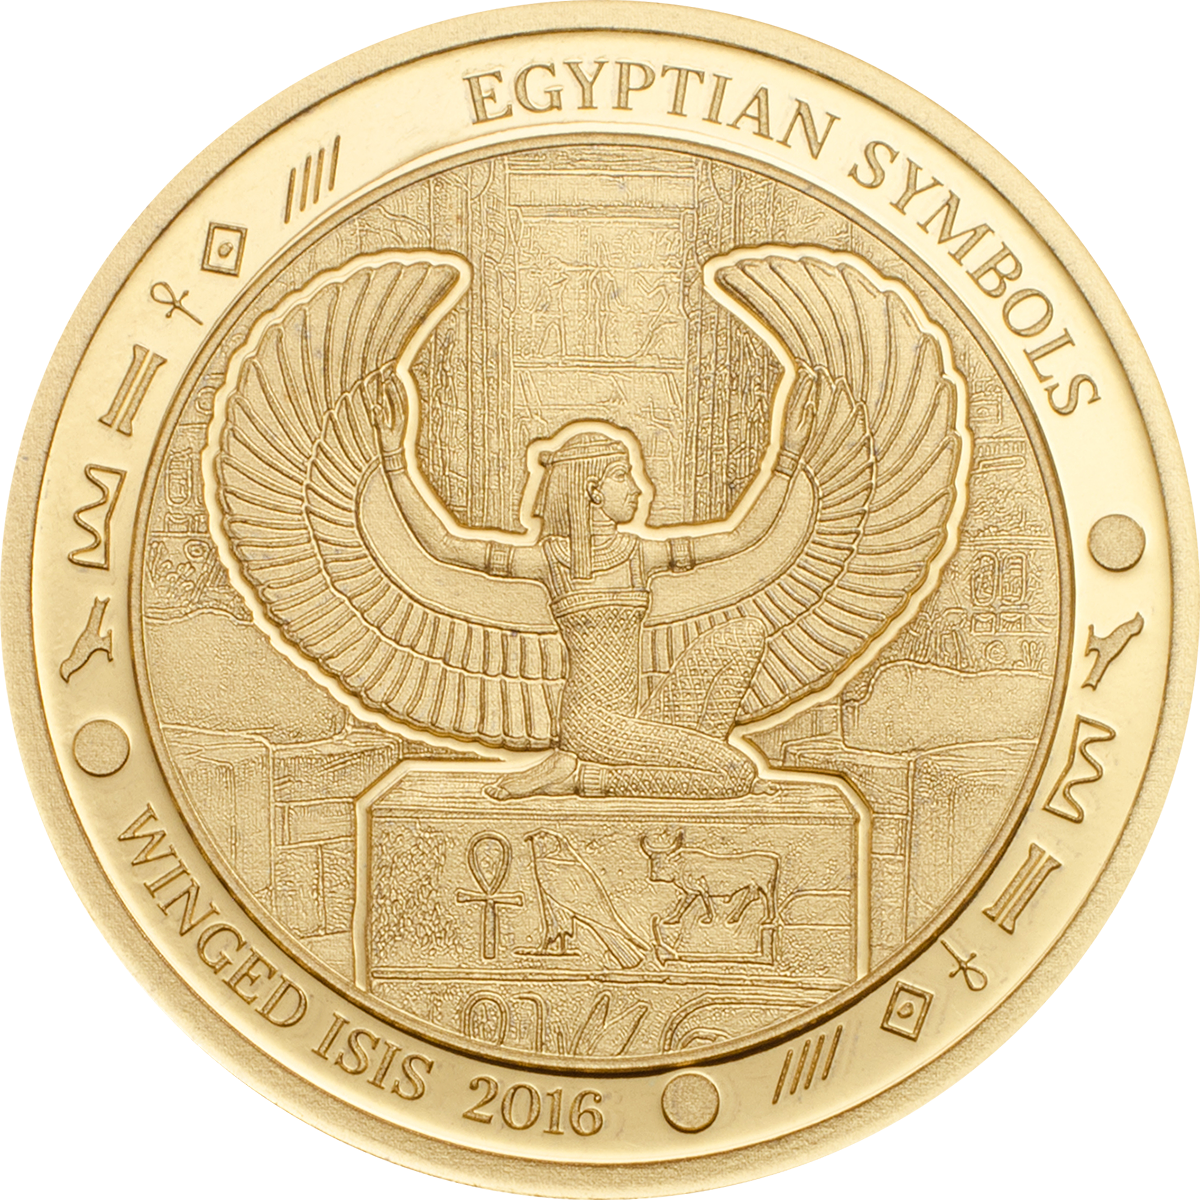 A Gold Coin With A Winged Figure On It